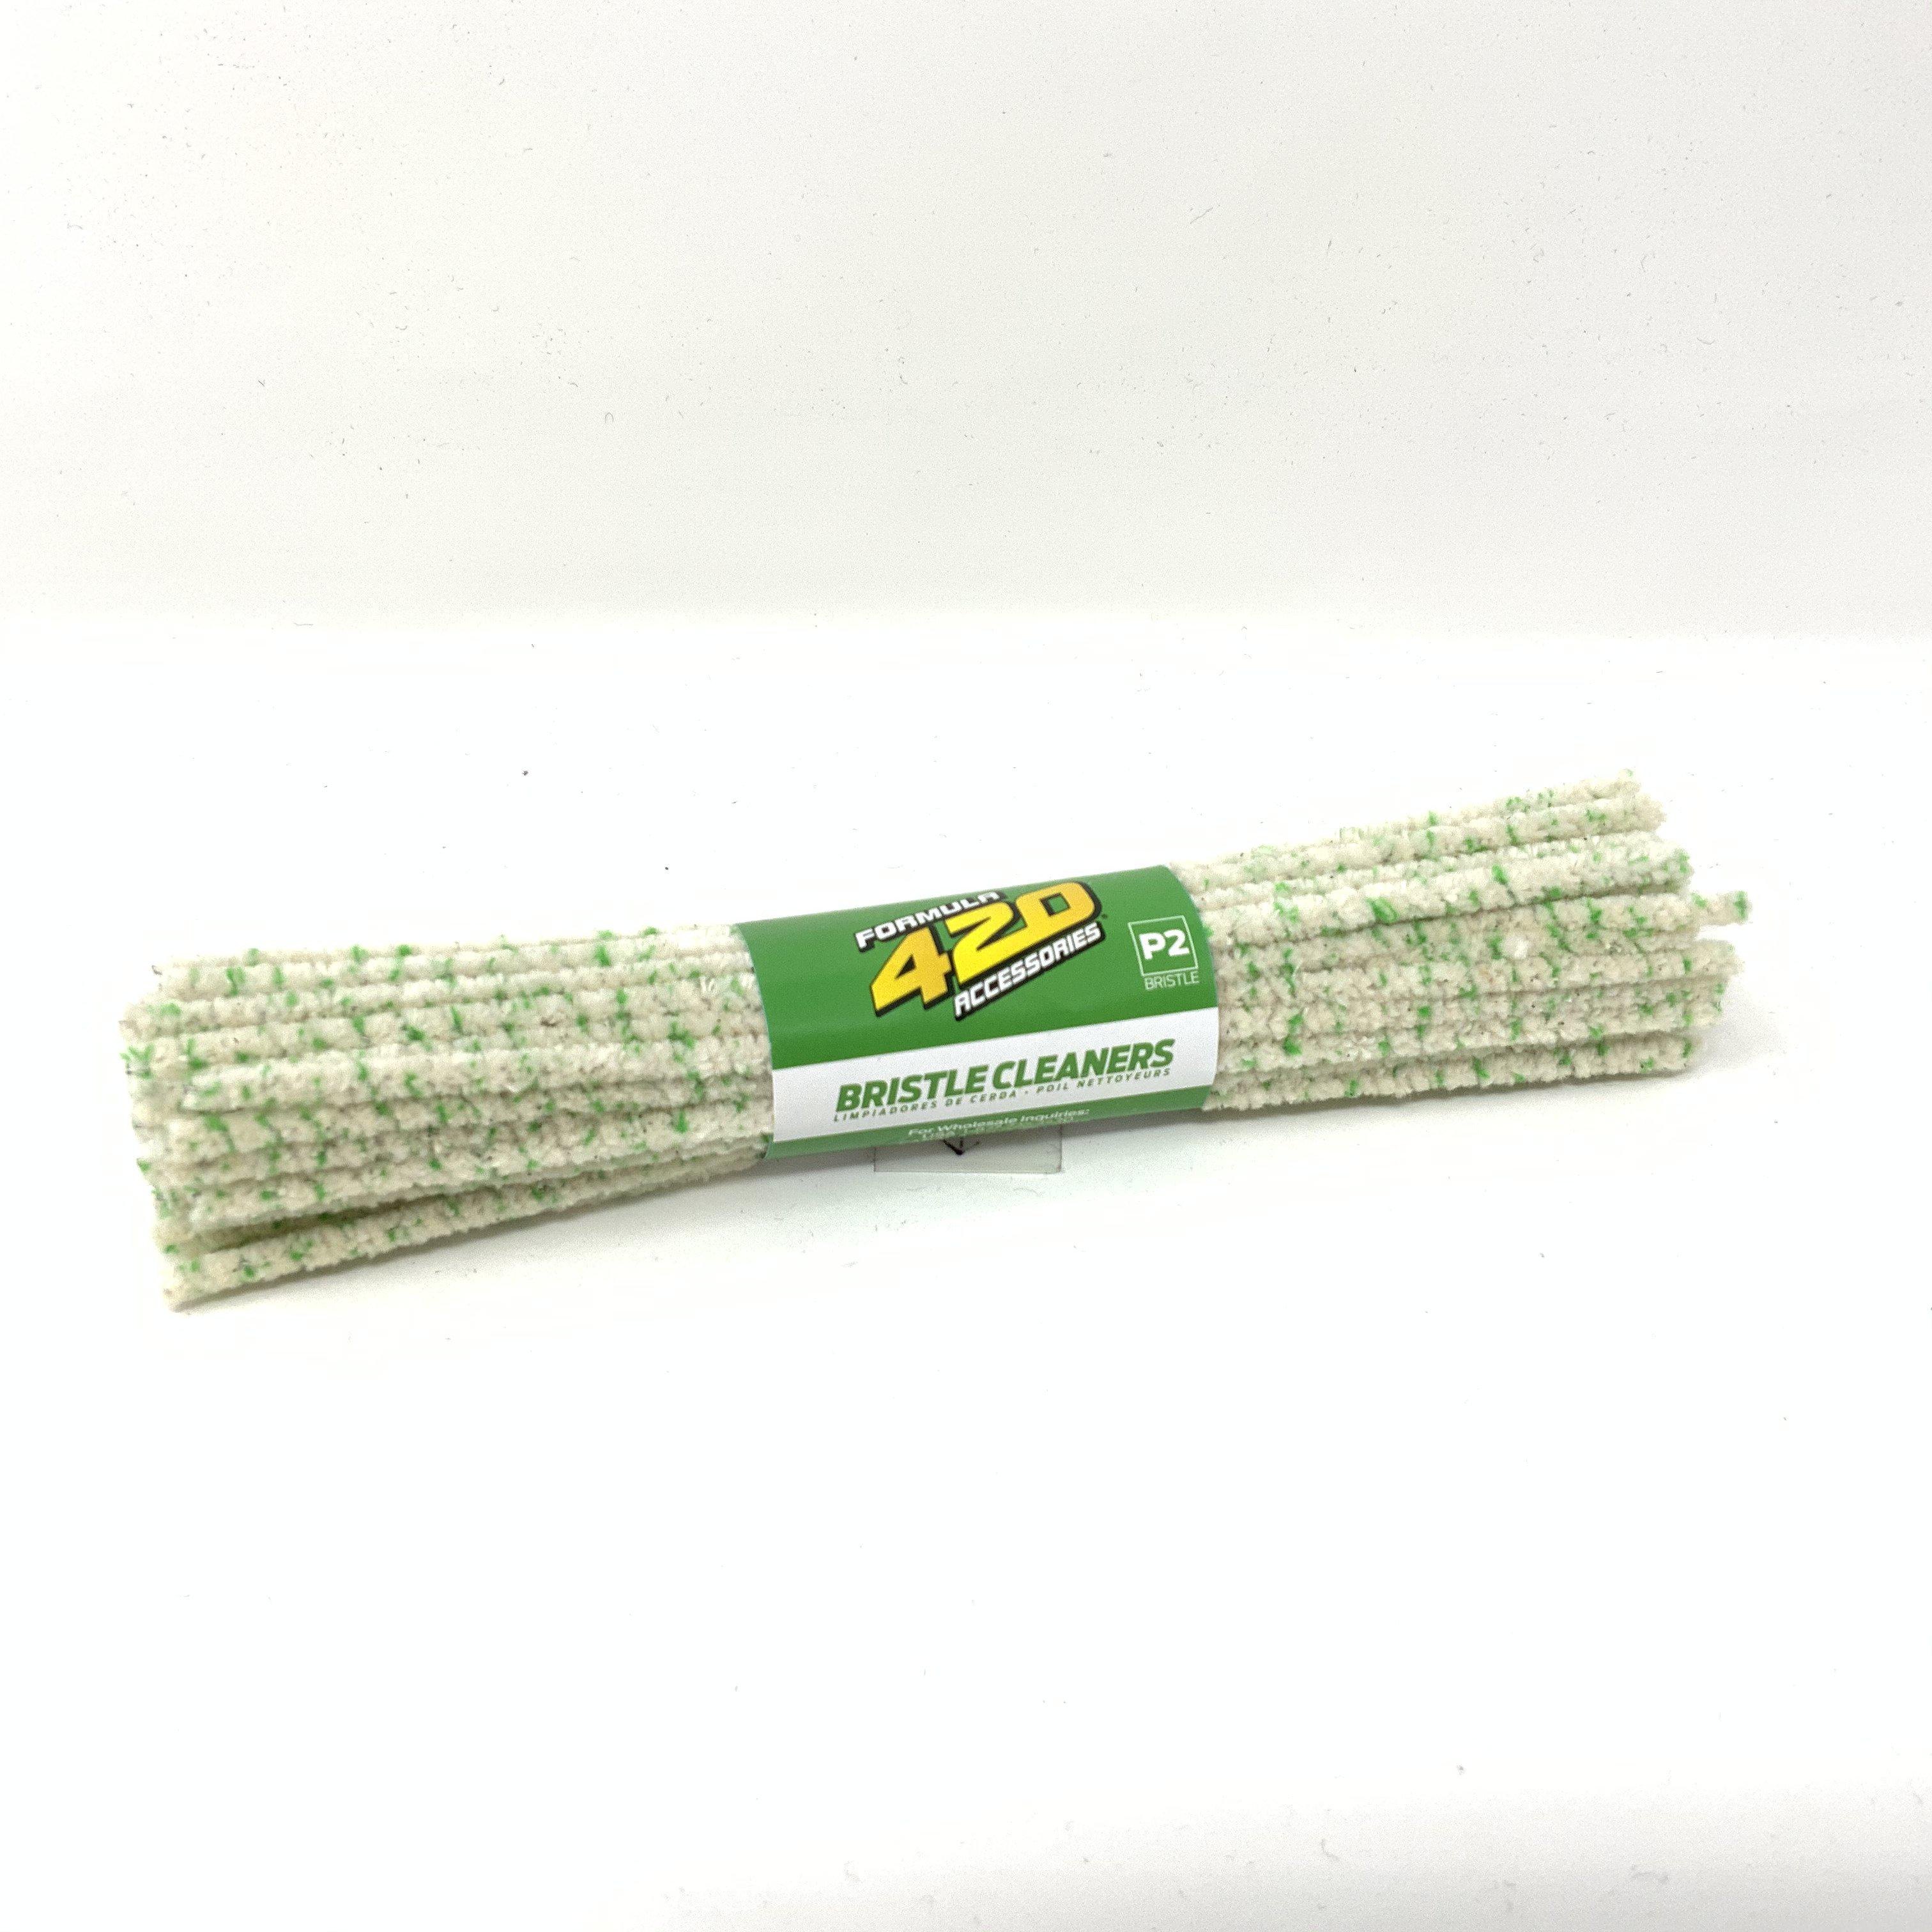 Shine Bright with 420 Glass Pipe Cleaner - 16oz